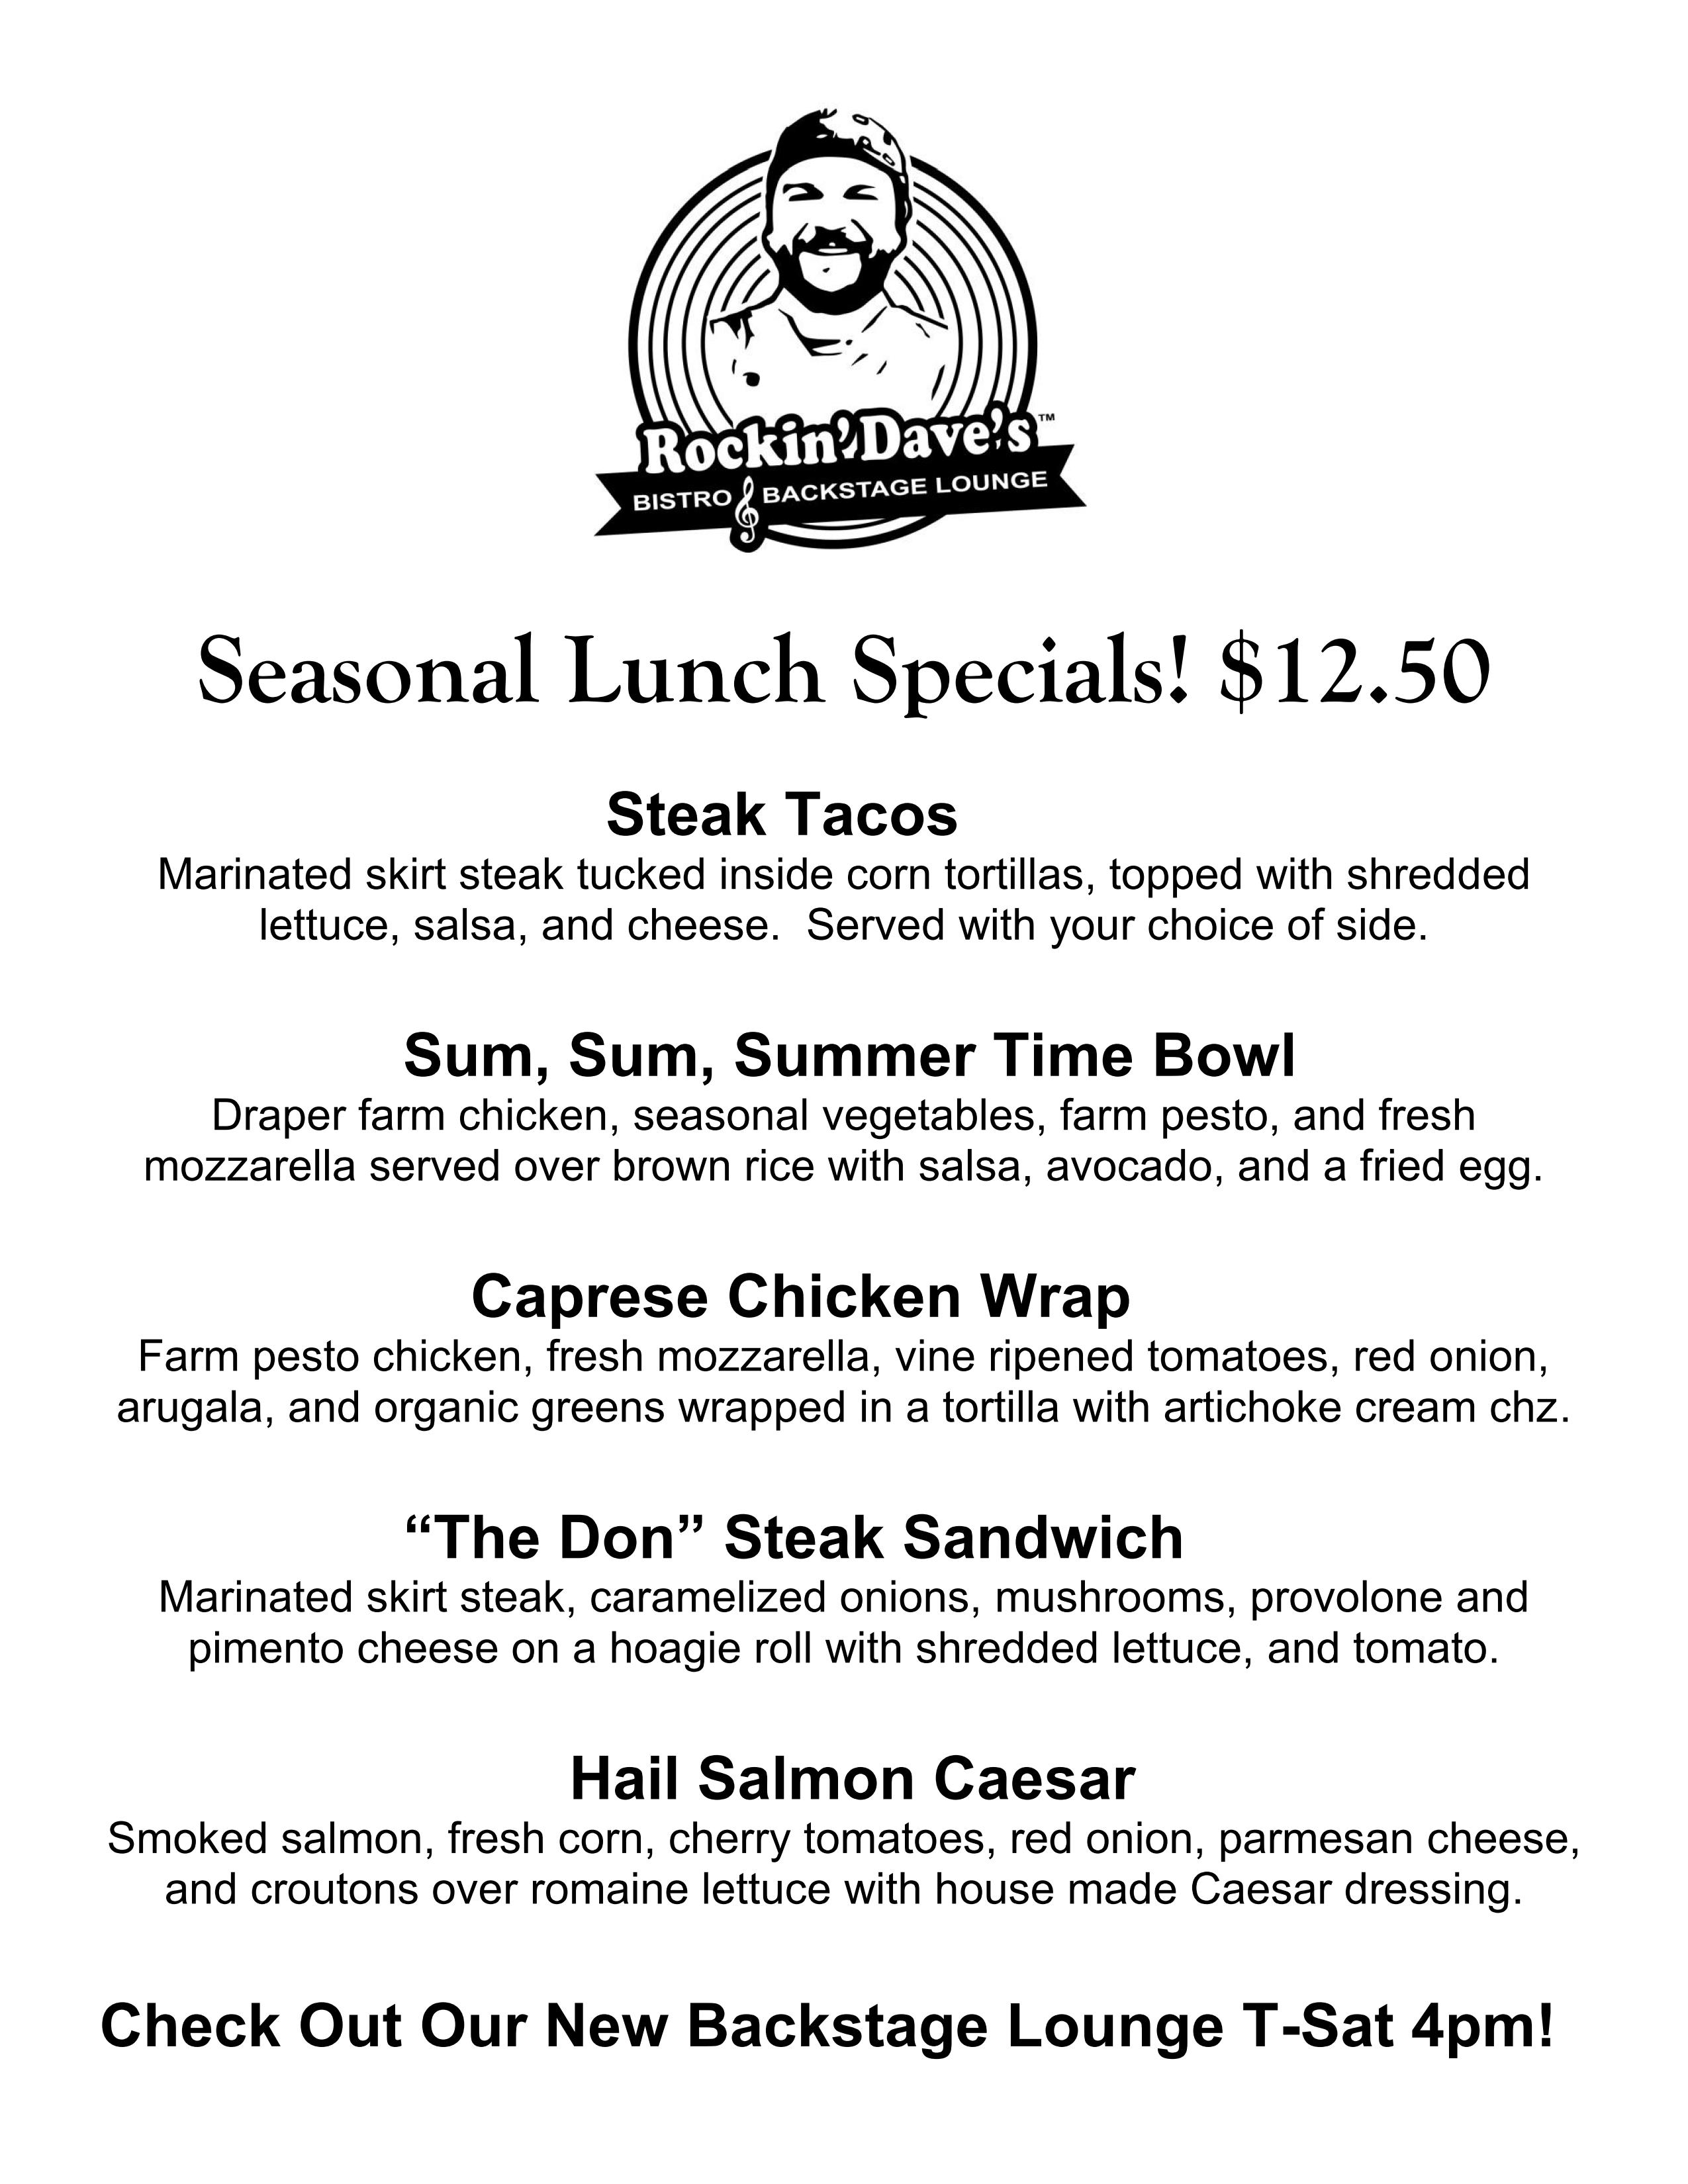 Lunch Specials Template#5_04 - Rockin' Dave's Bistro & Backstage Lounge